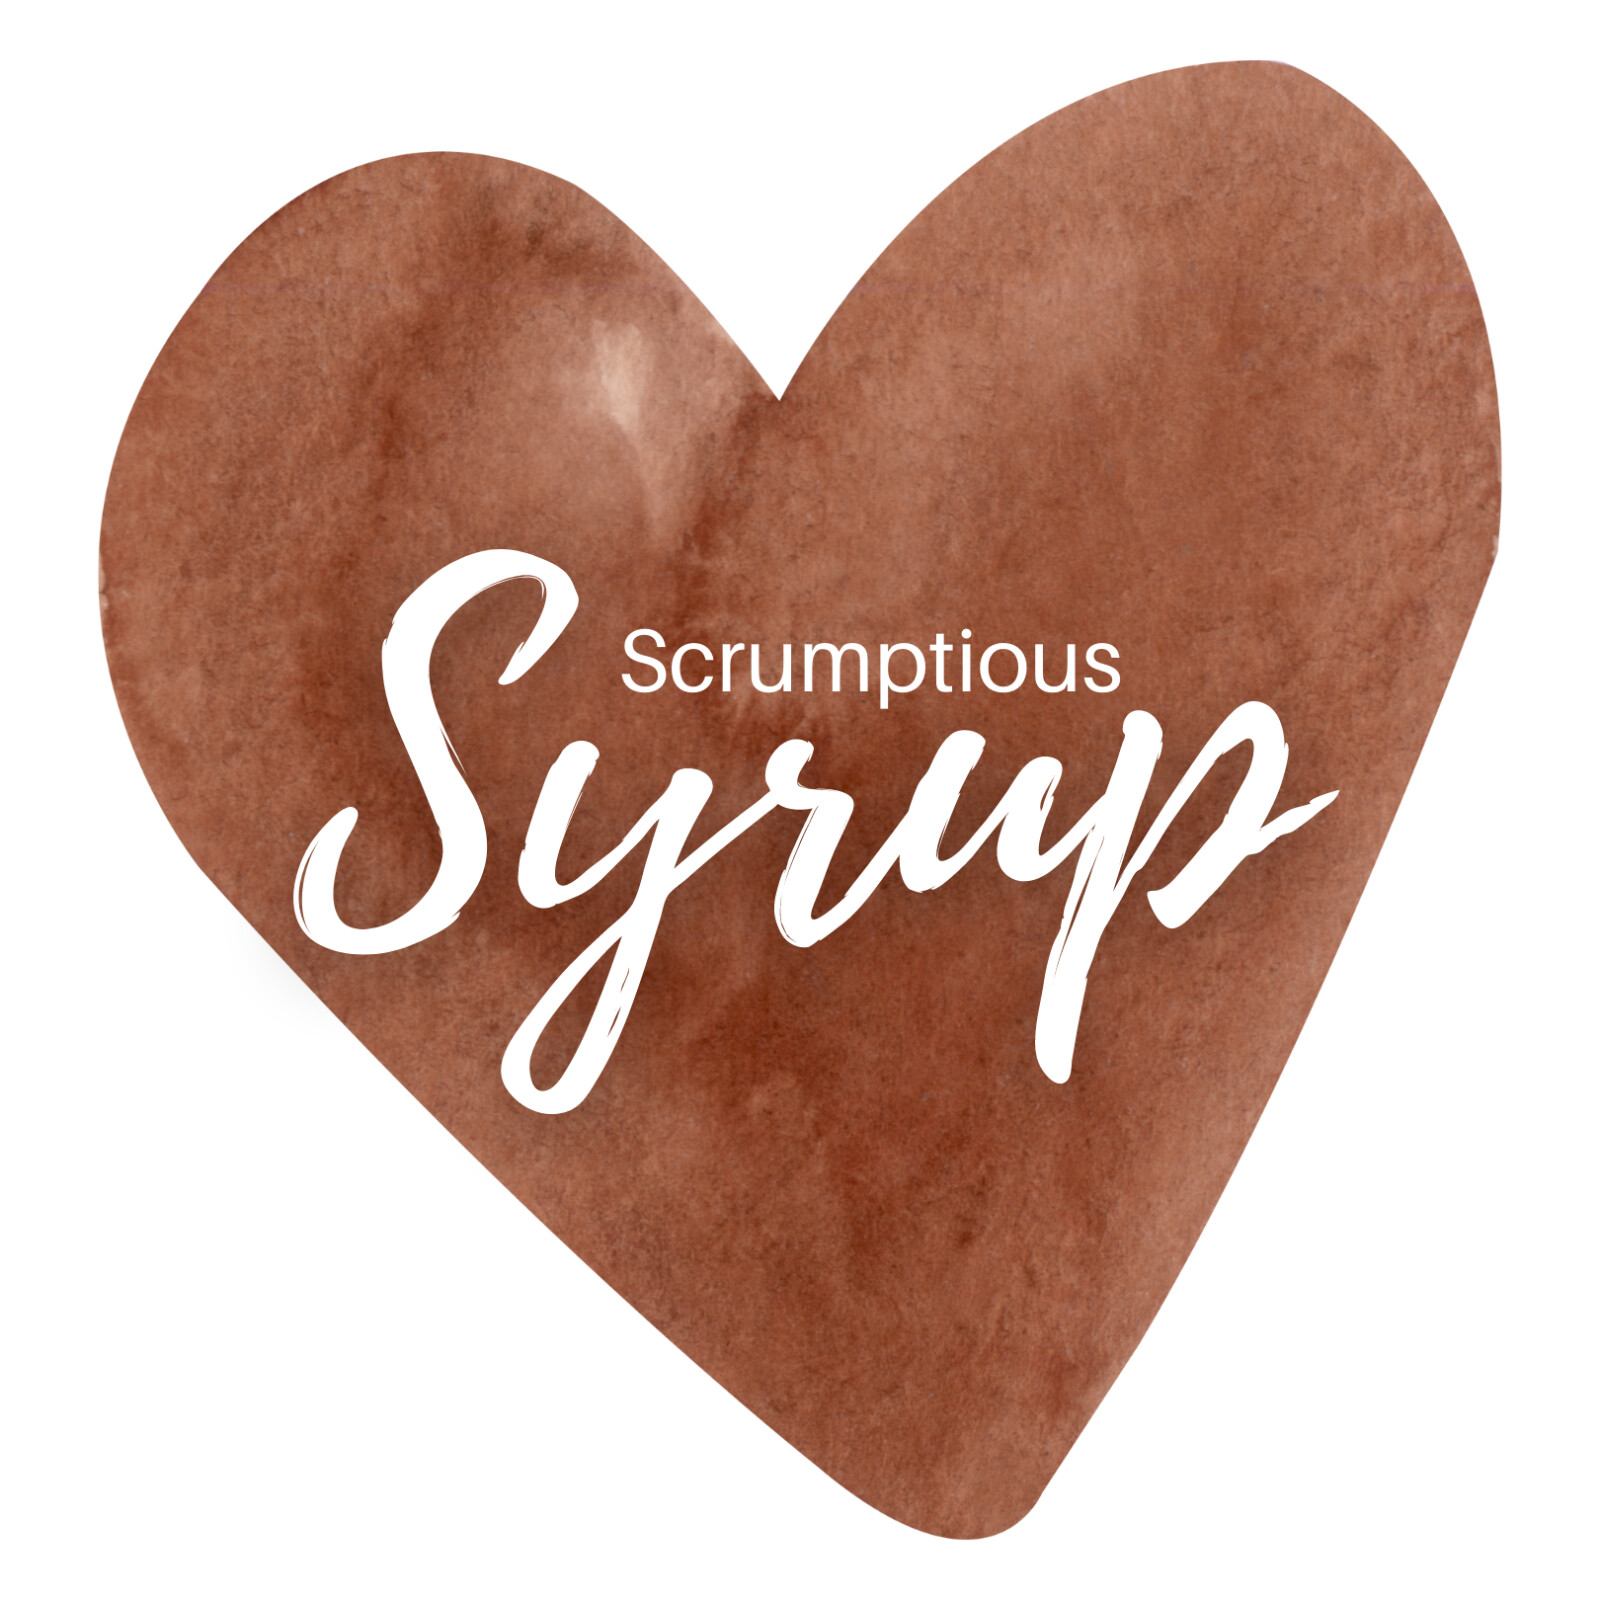 Scrumptious Syrup